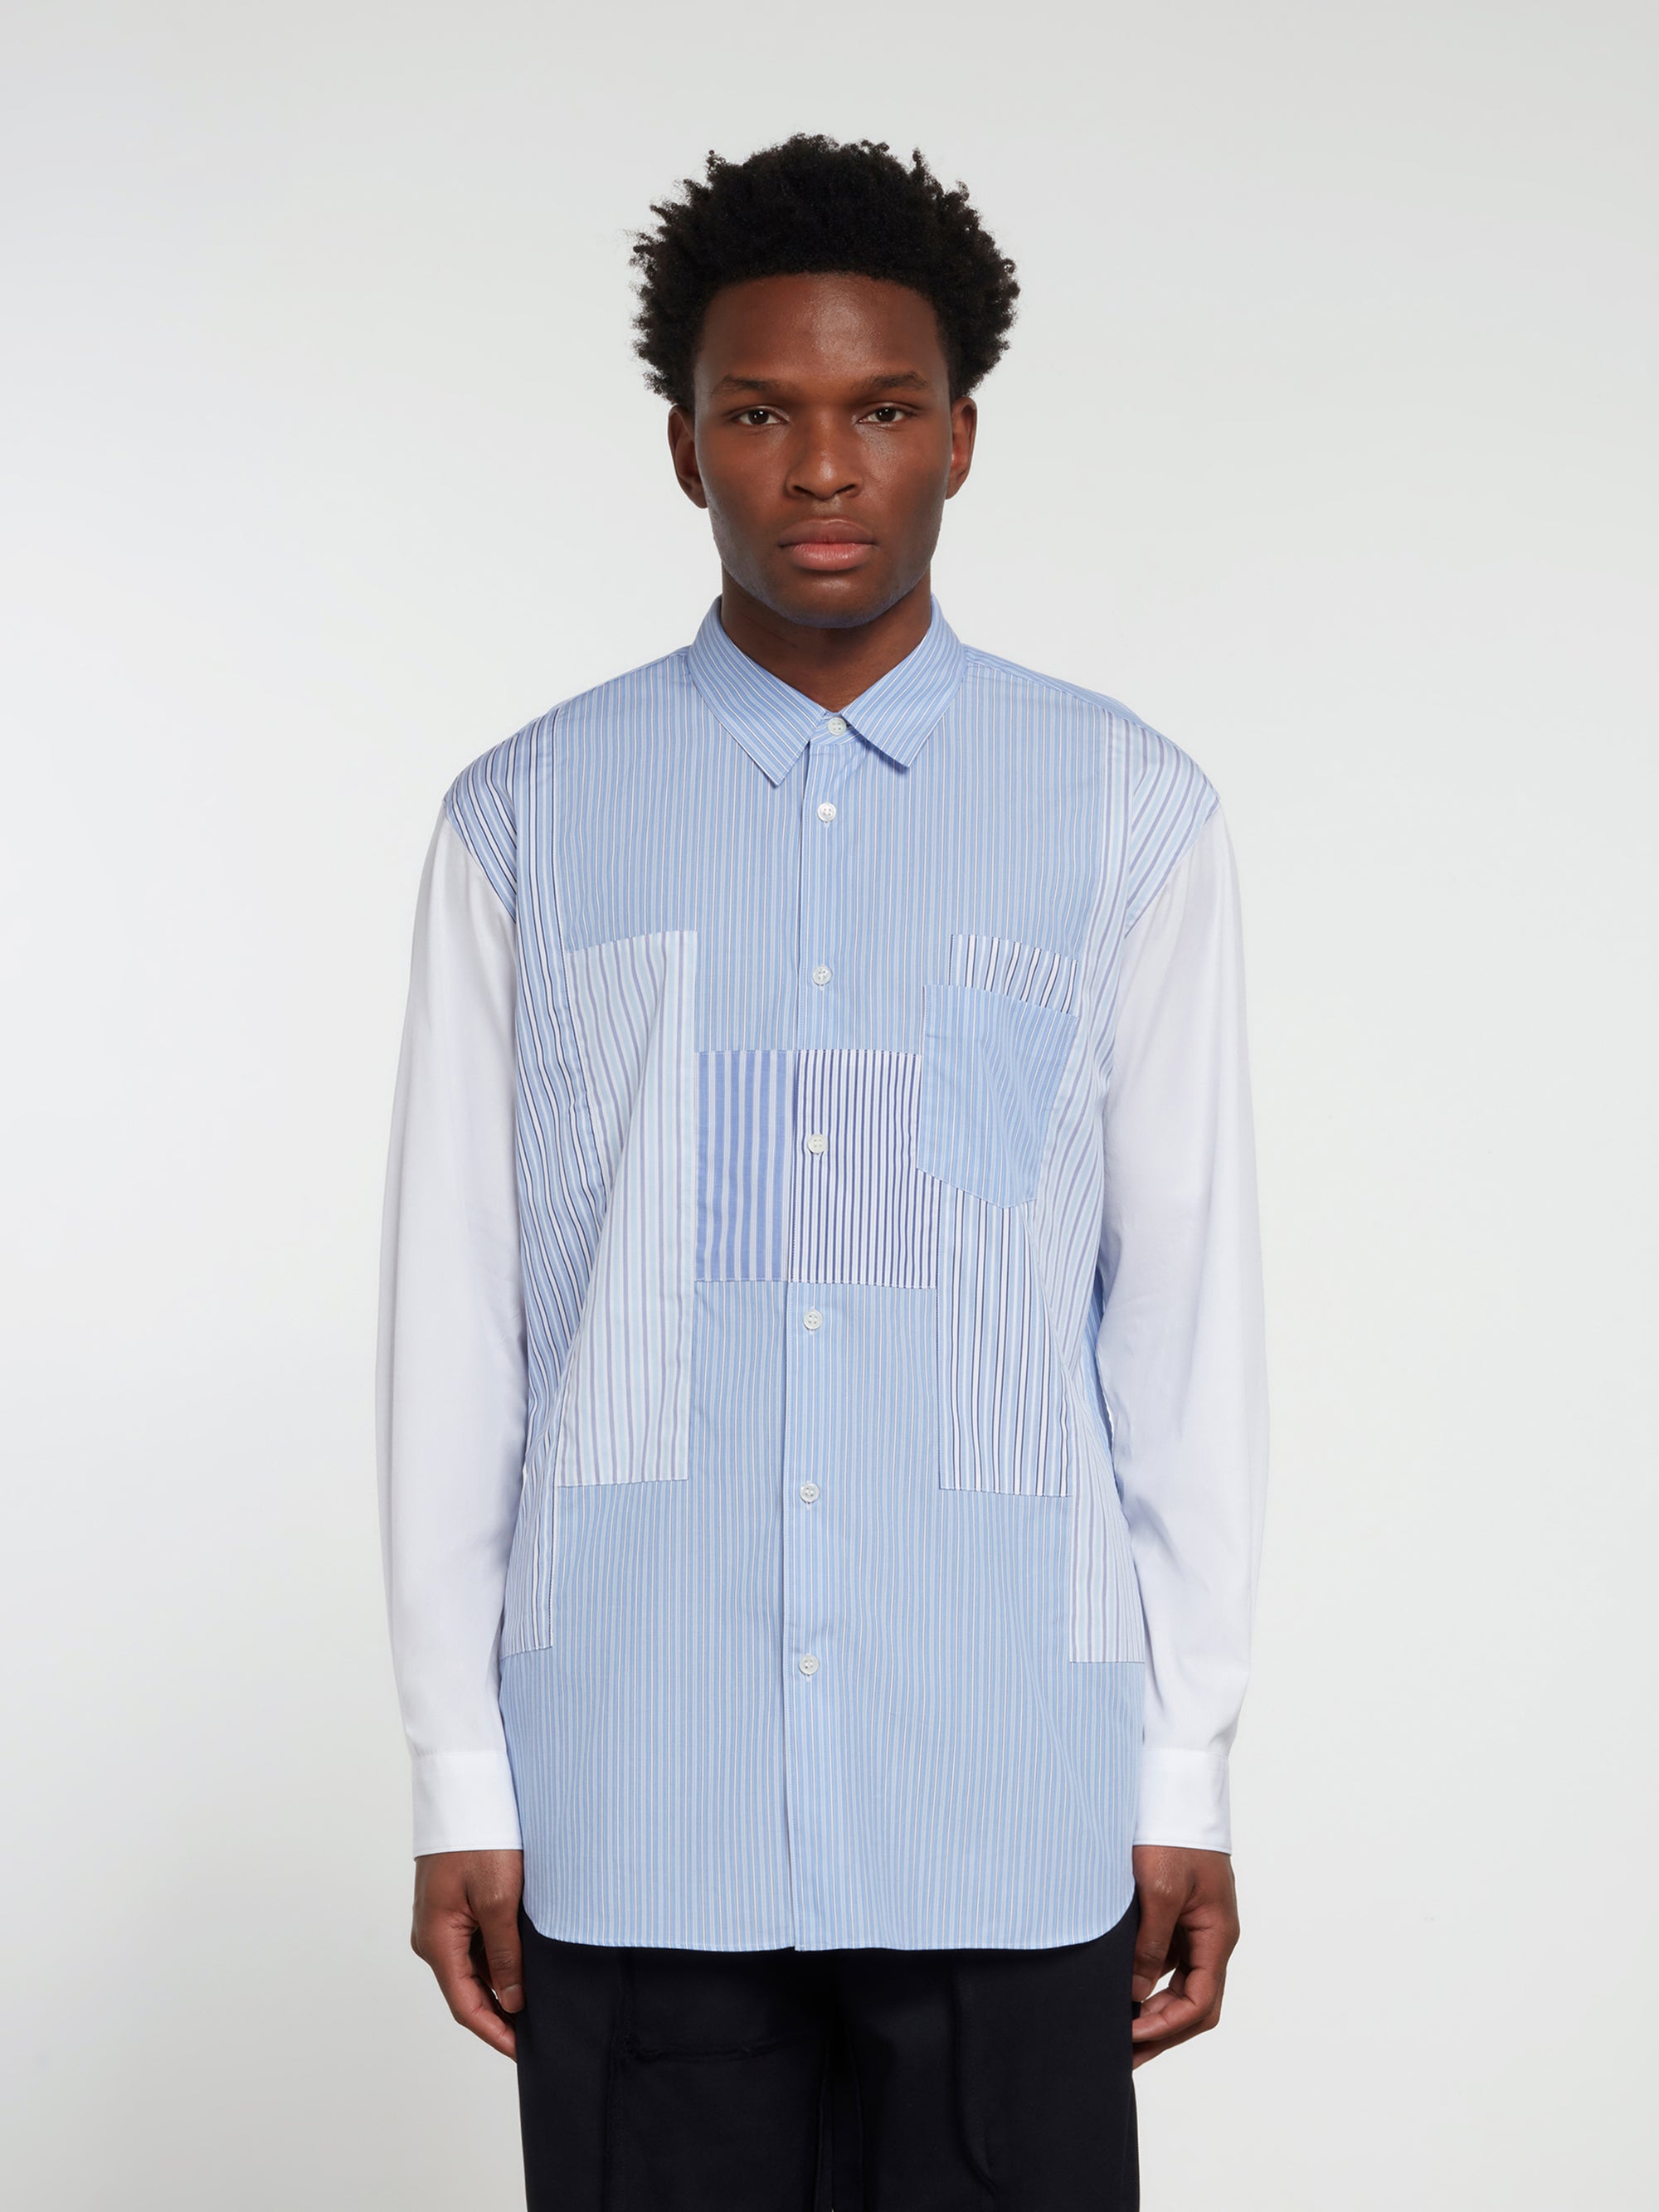 CDG Shirt Forever - Classic Fit Contrast Patchwork Stripe Shirt - (Stripe/Mix) view 2